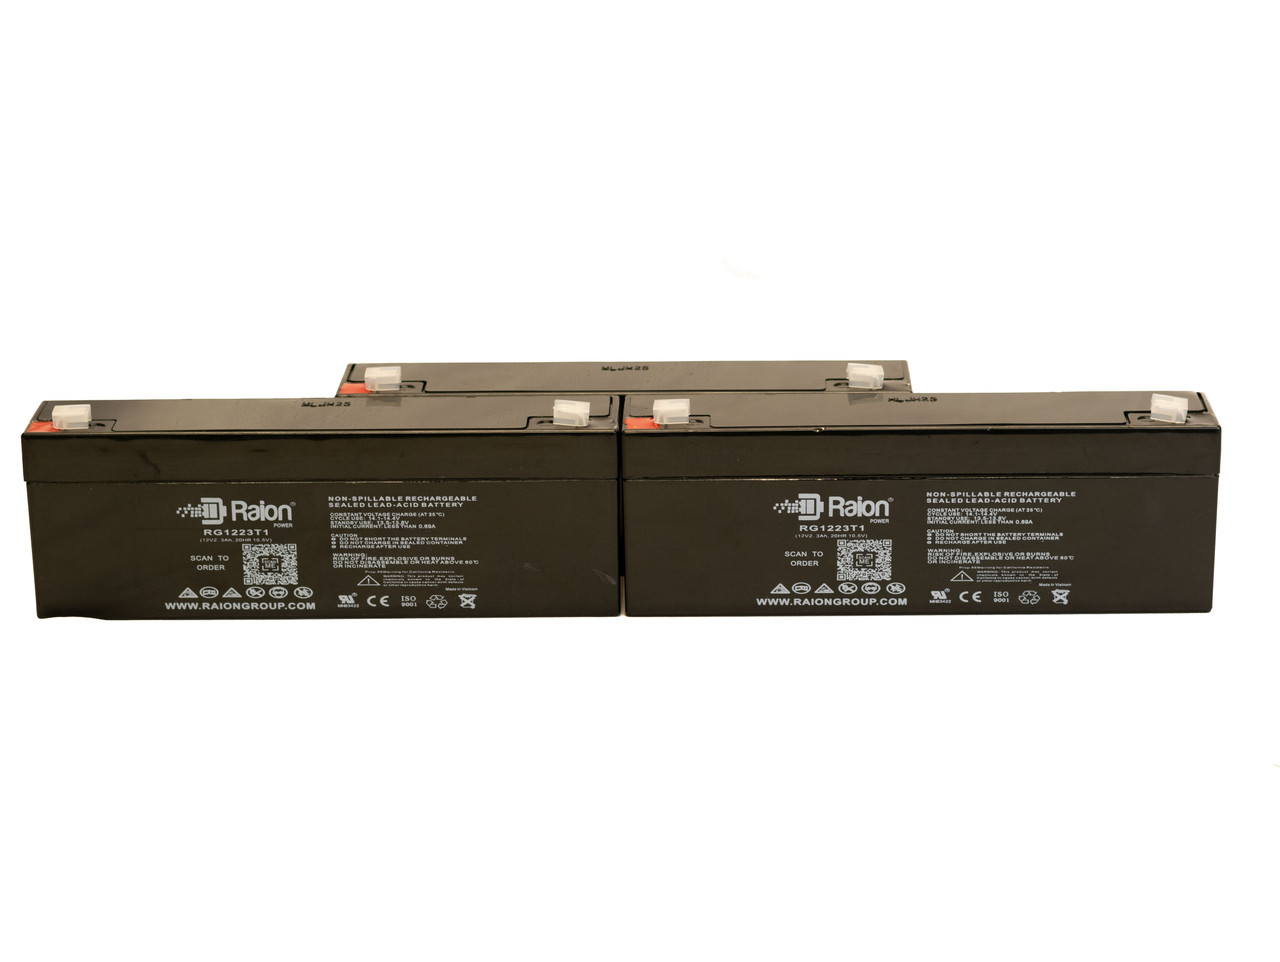 Raion Power 12V 2.3Ah RG1223T1 Replacement Medical Battery for Odonnell 7665P - 3 Pack